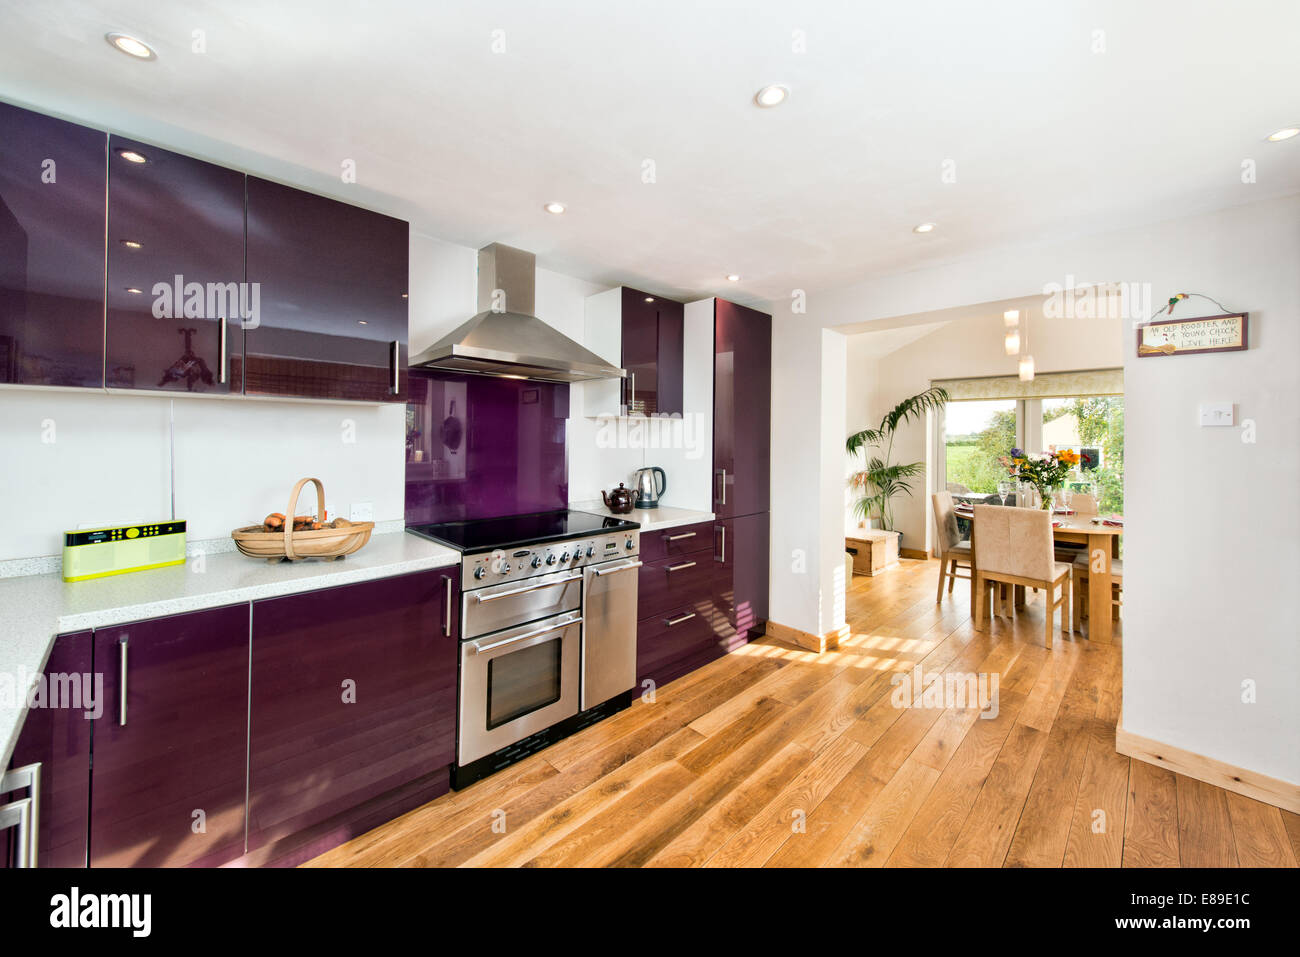 A light, airey, contemporary designer kitchen diner decorated in aubergine & white with solid wood flooring Stock Photo